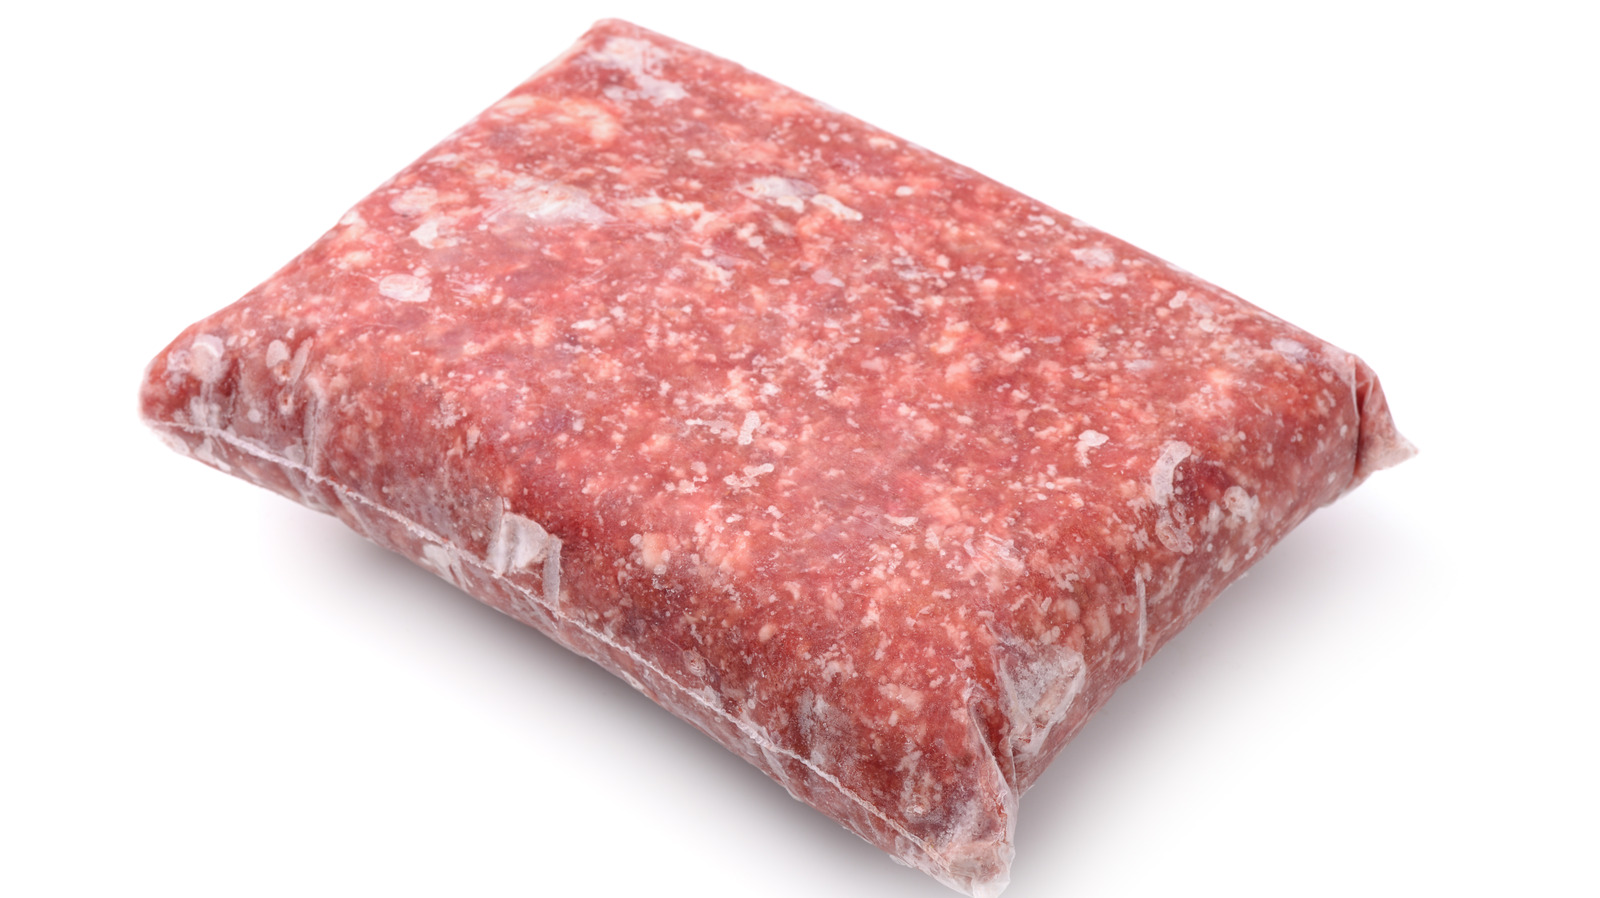 https://www.tastingtable.com/img/gallery/the-12-biggest-mistakes-youre-making-when-freezing-ground-beef/l-intro-1667331972.jpg